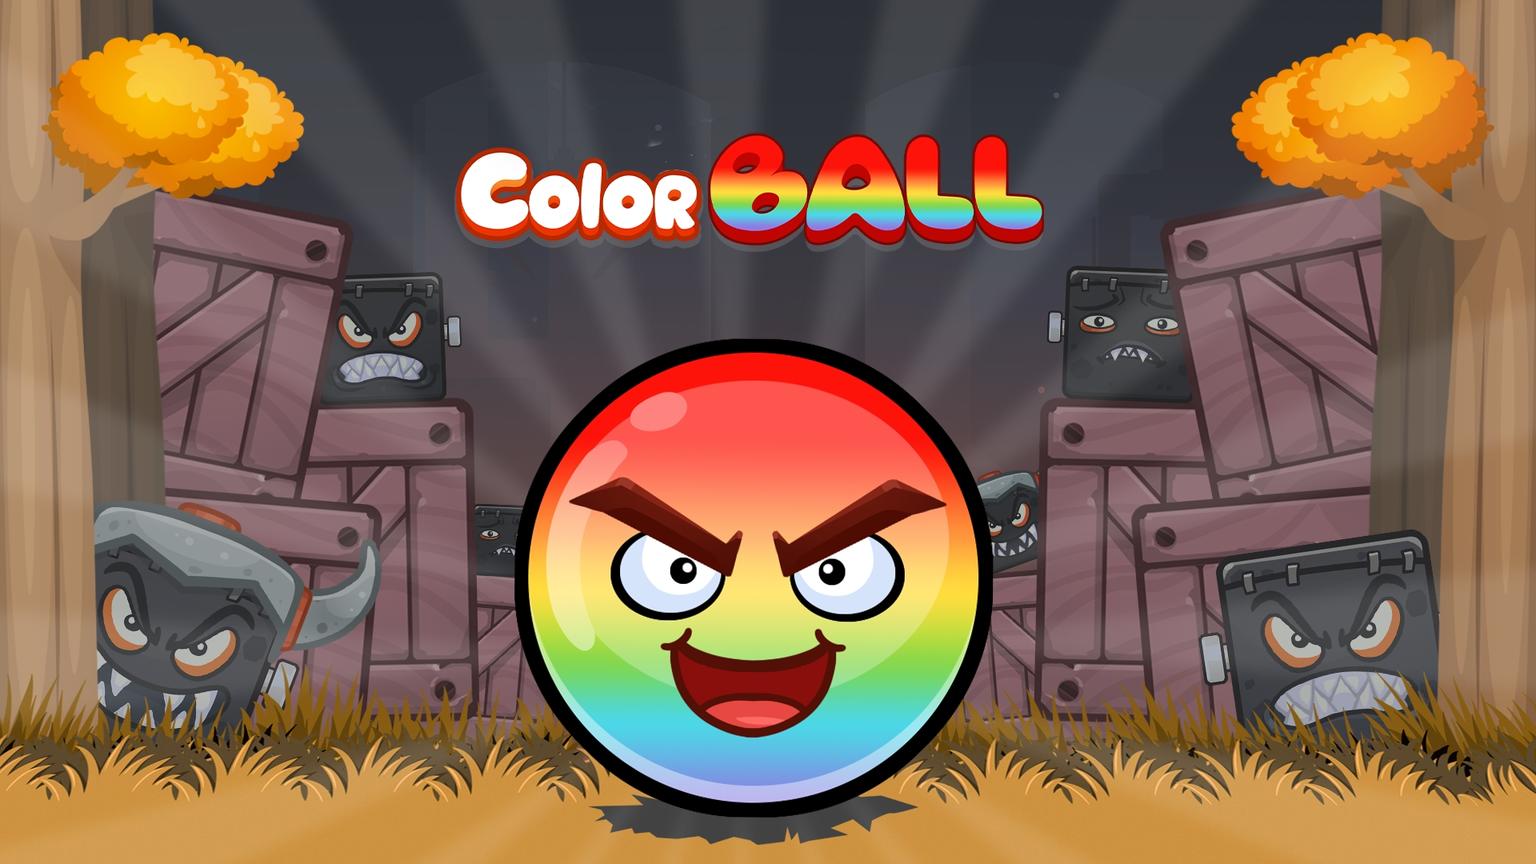 Colorball